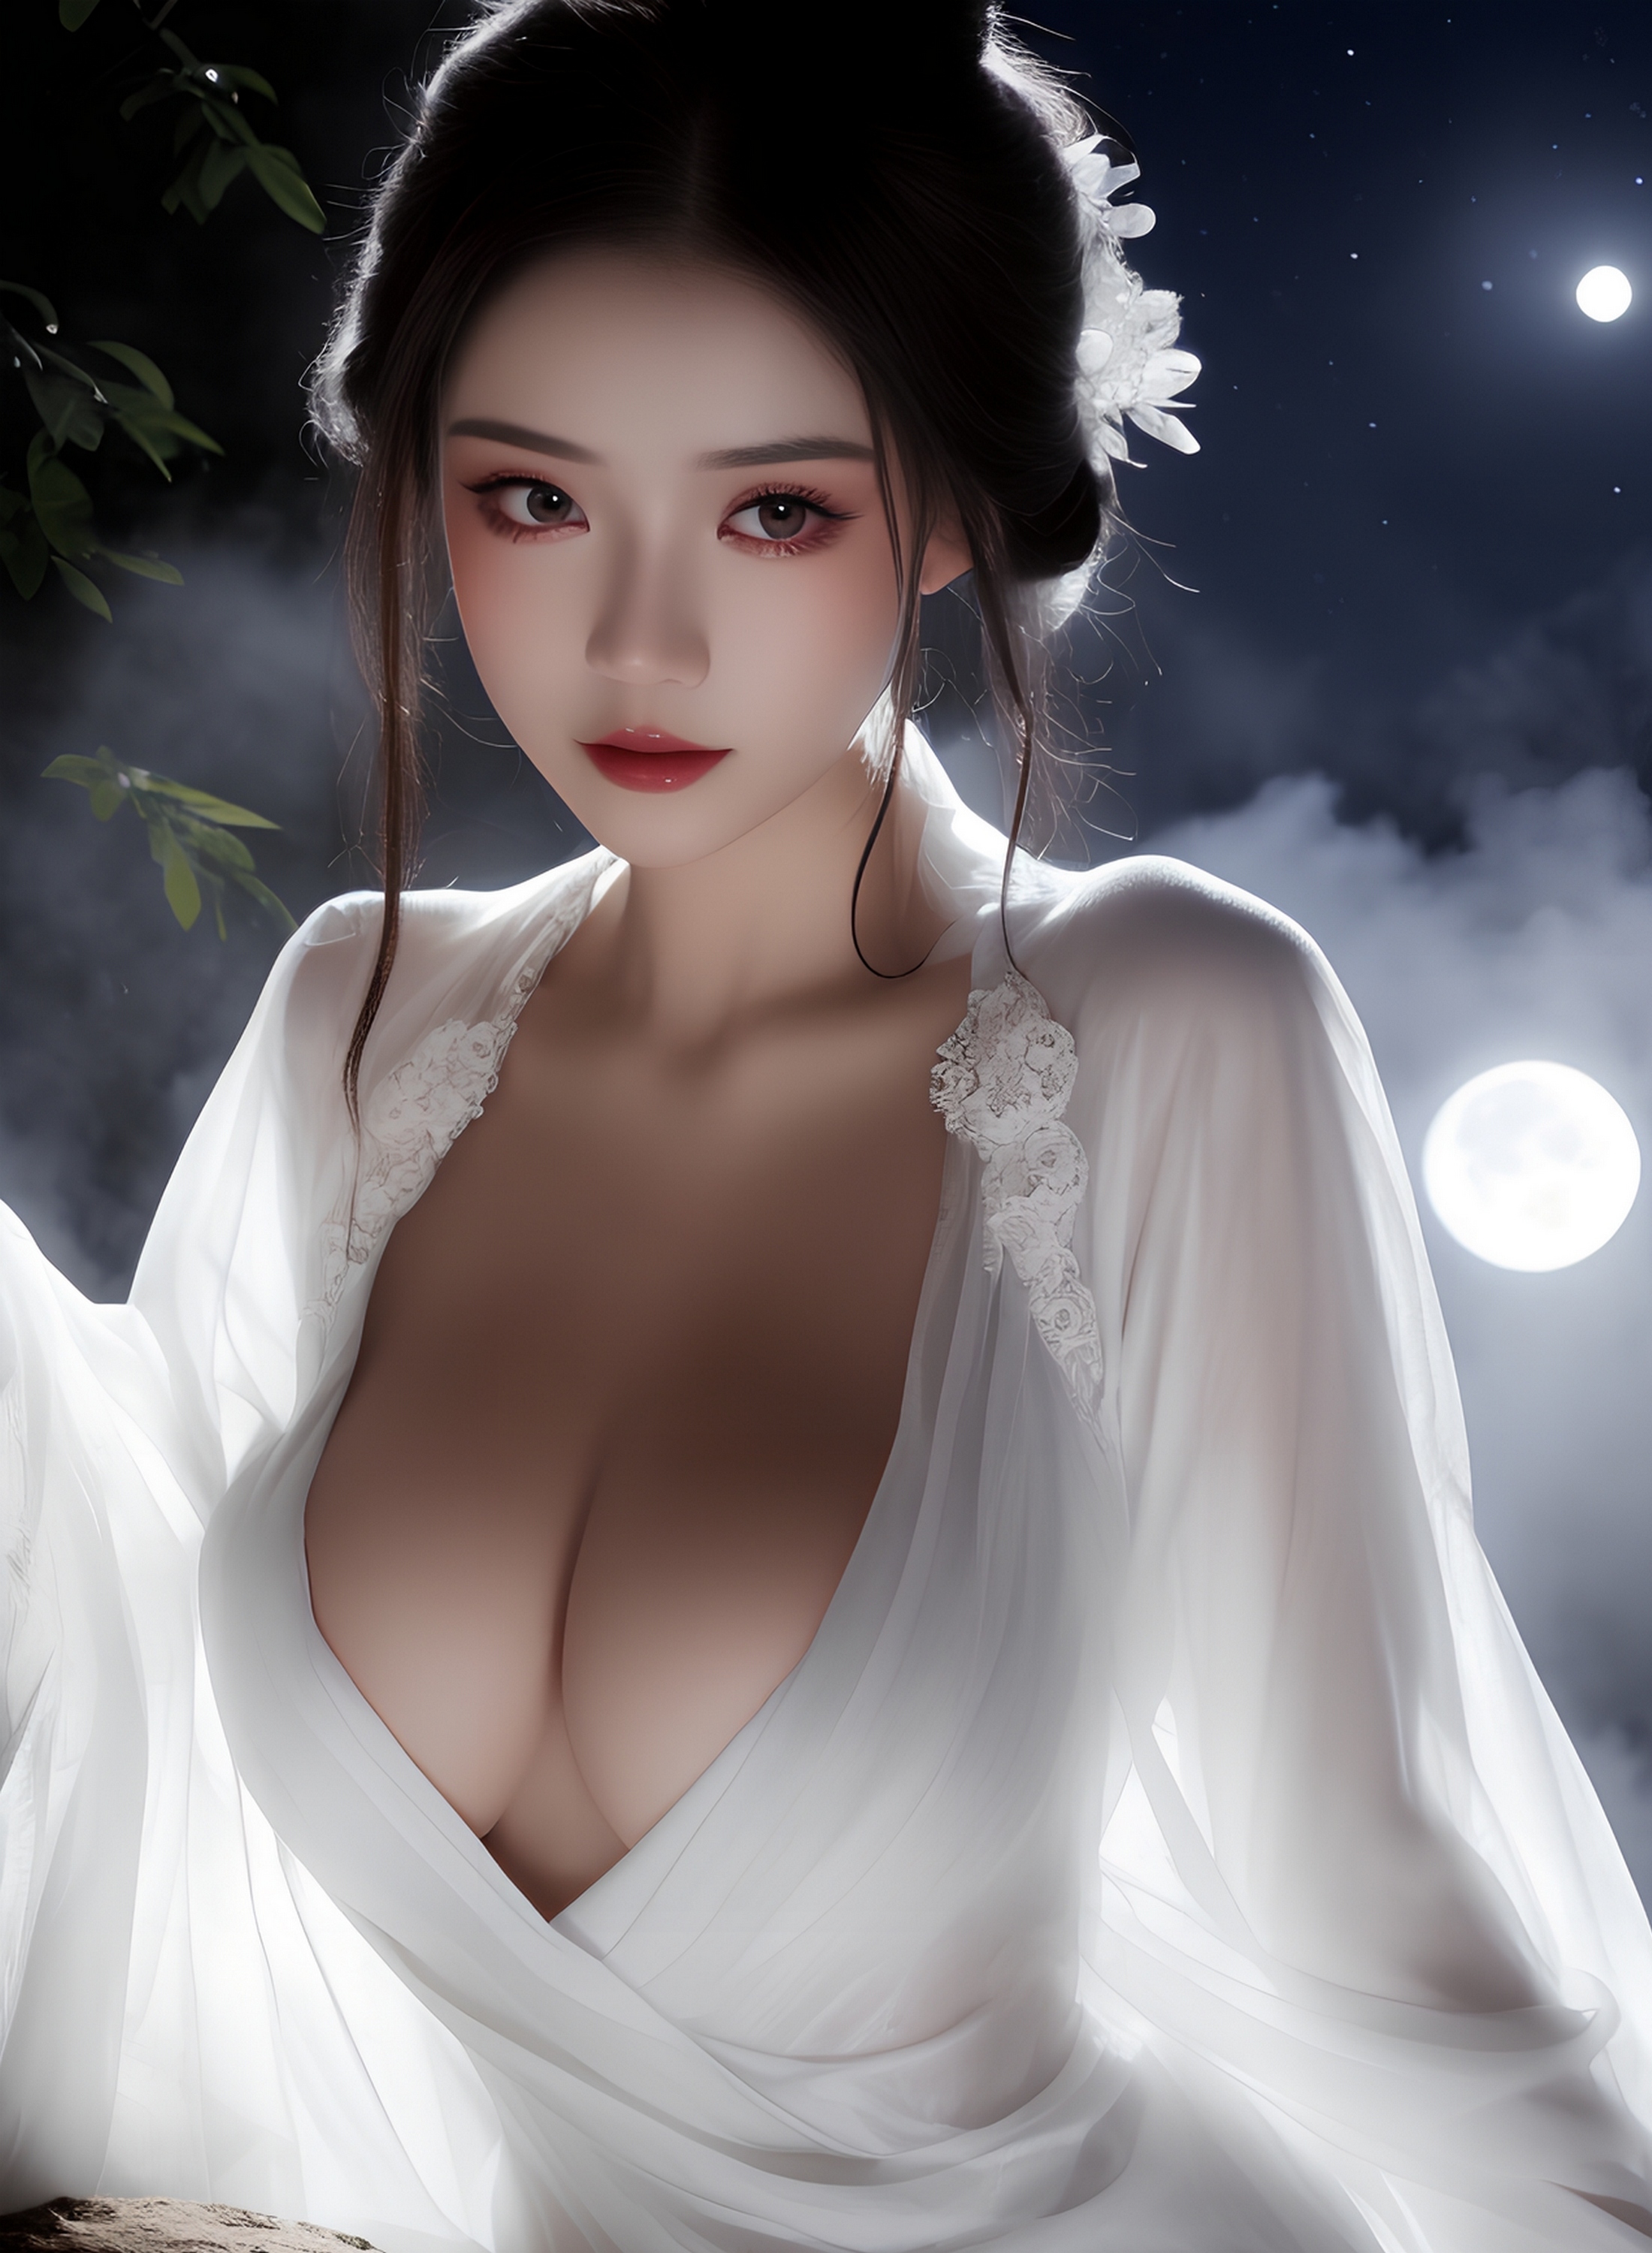 Wallpaper girl, big boobs, beautiful eyes, asian beauty, cute Asian for  mobile and desktop, section девушки, resolution 3840x2160 - download